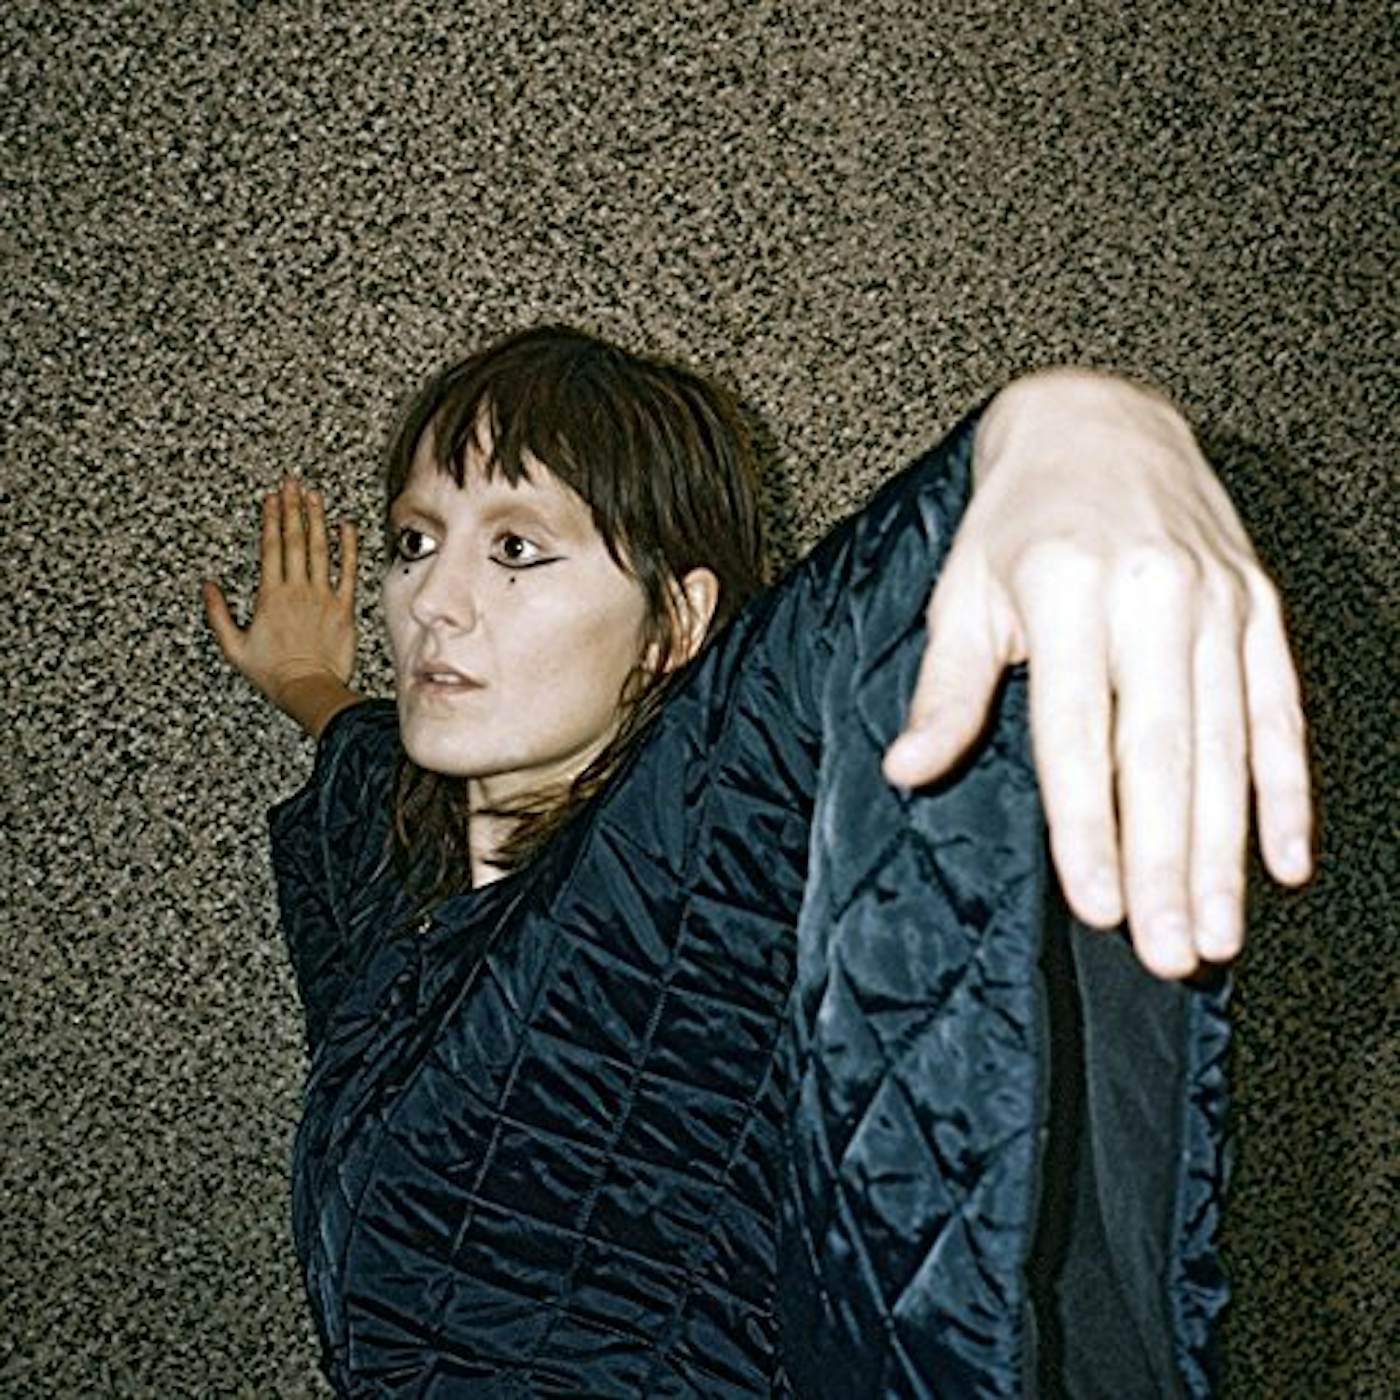 Cate Le Bon CRAB DAY CD